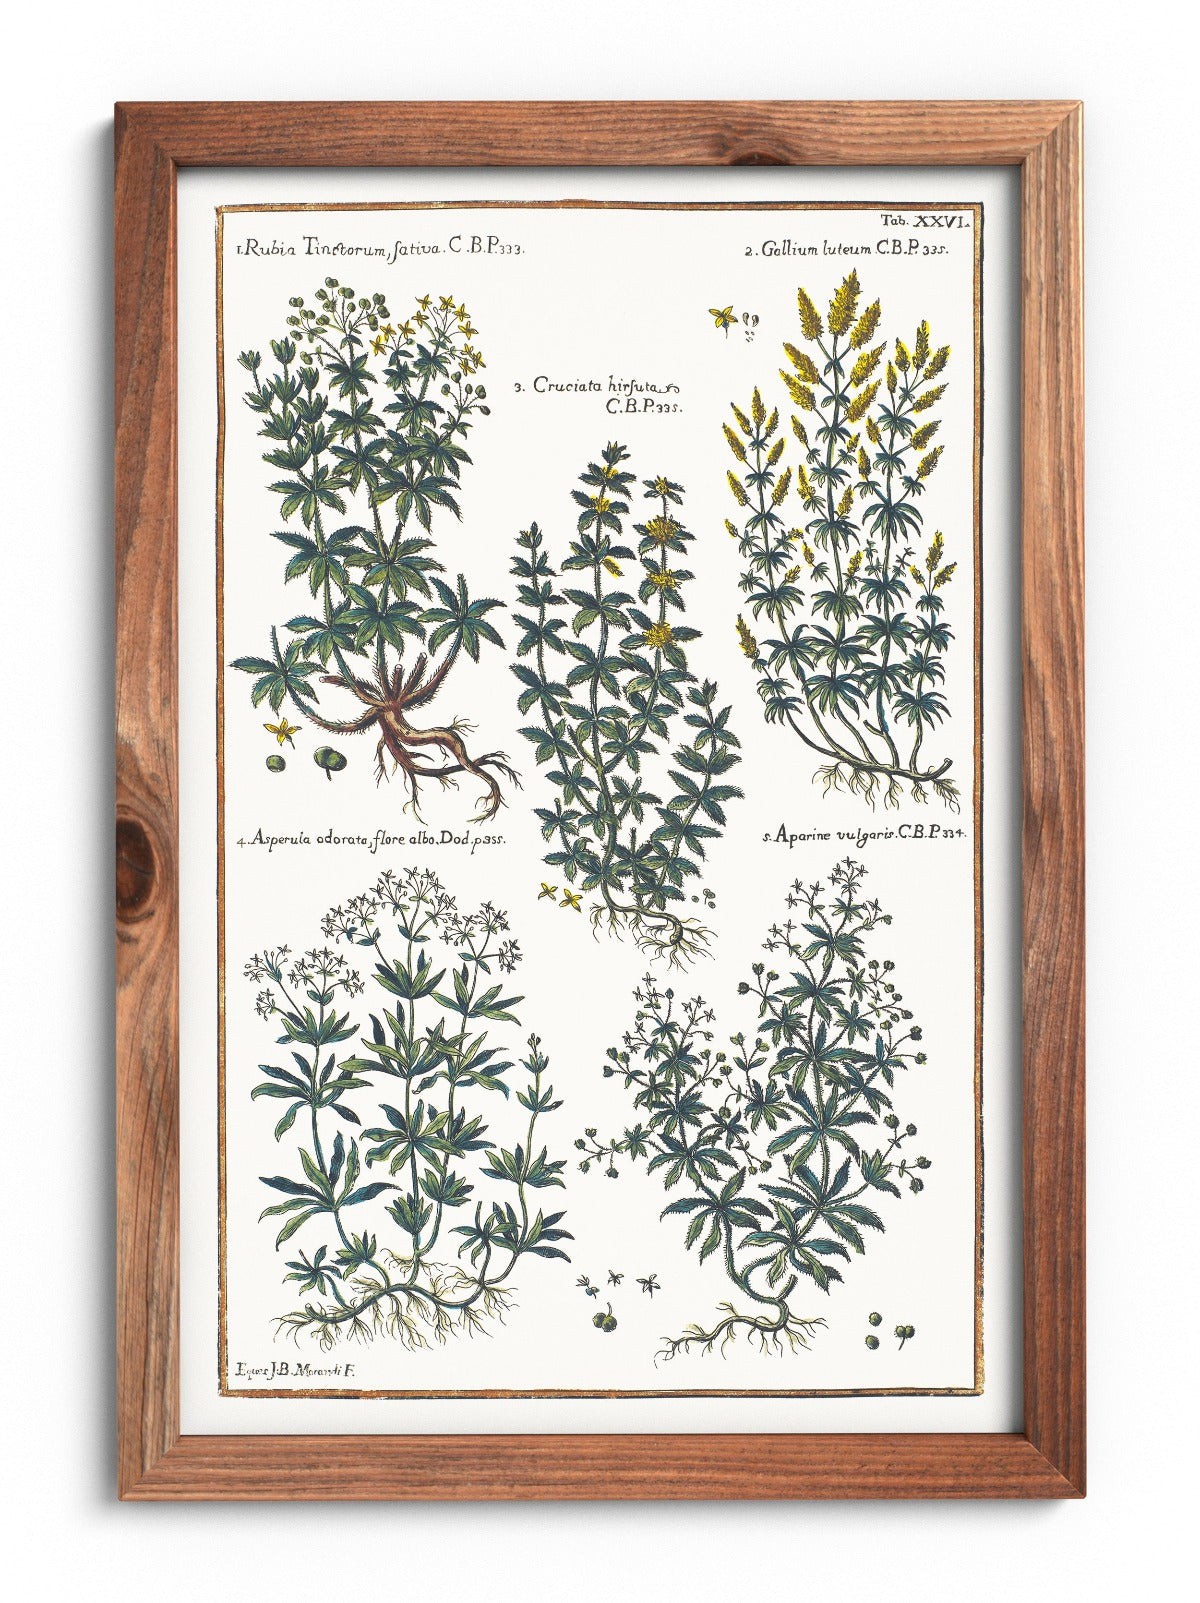 Bedstraw and woodruff poster